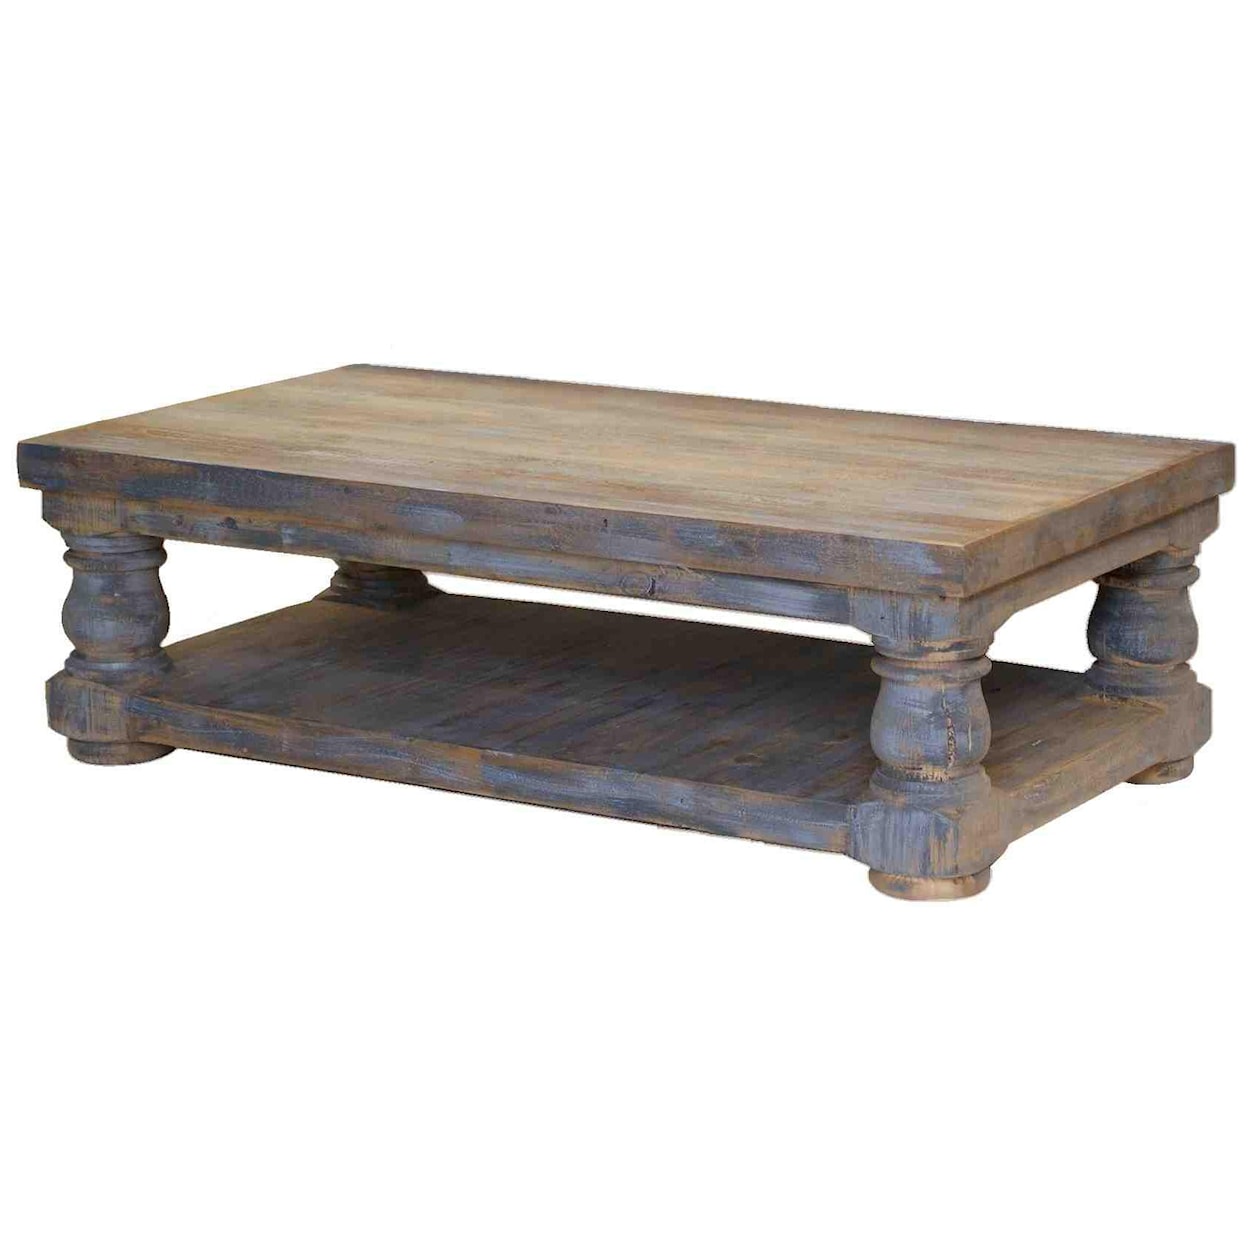 Furniture Source International Occasional Tables Coffee Table